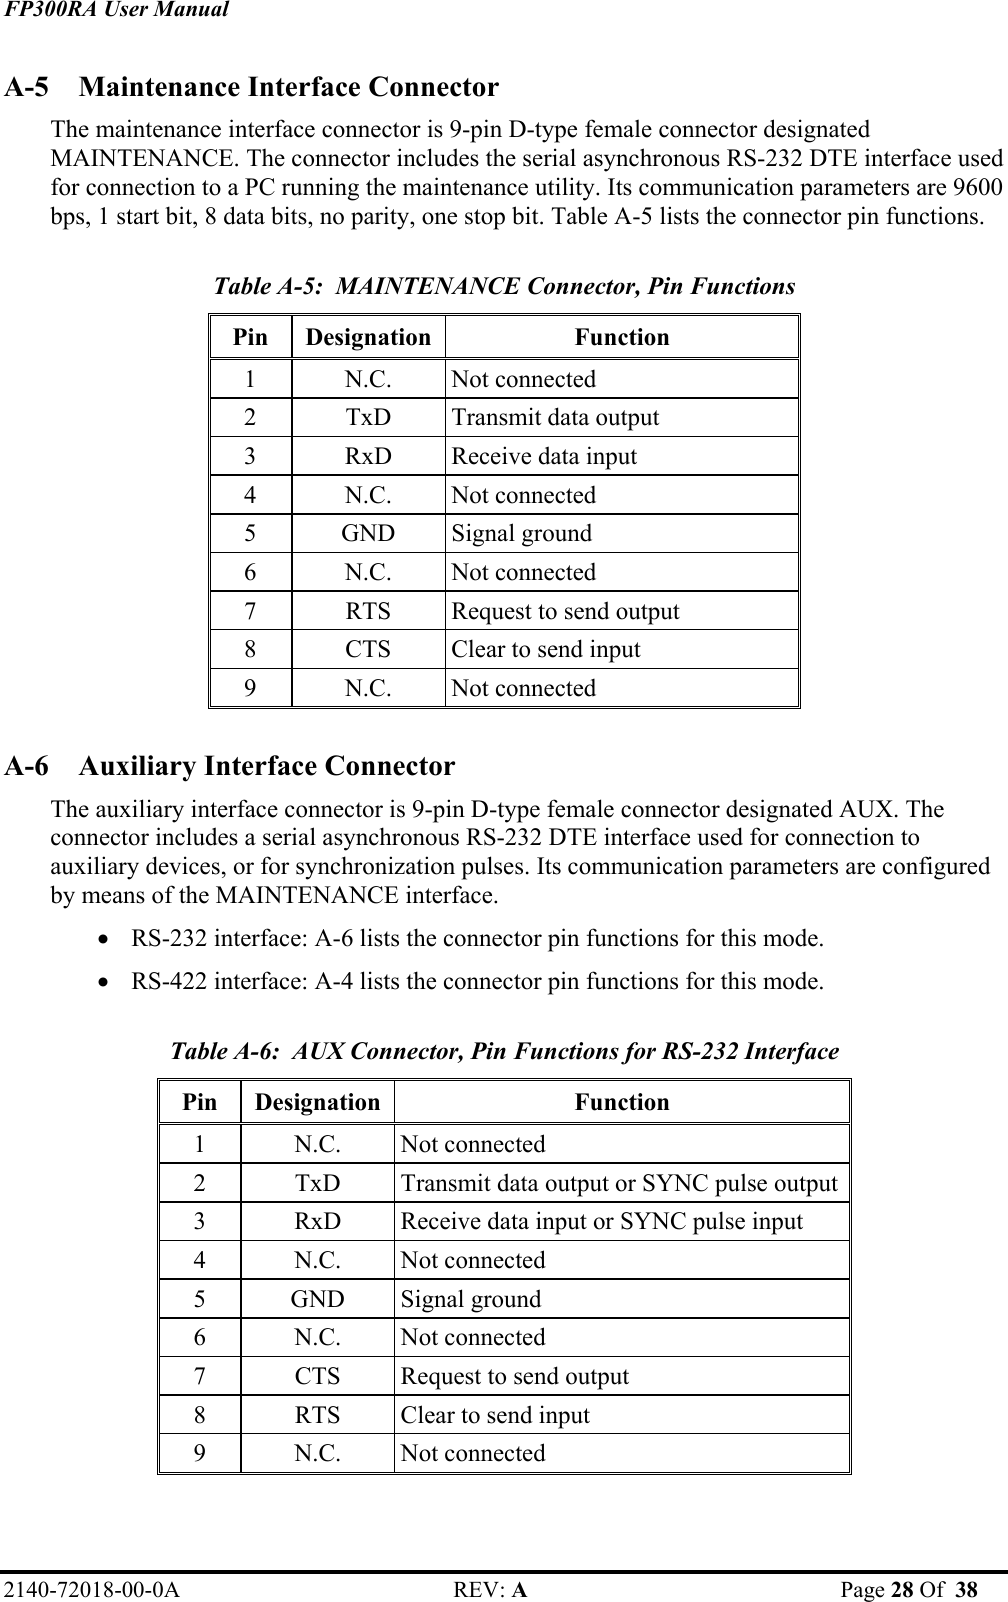 FP300RA User Manual 2140-72018-00-0A REV: A  Page 28 Of  38  A-5 Maintenance Interface Connector The maintenance interface connector is 9-pin D-type female connector designated MAINTENANCE. The connector includes the serial asynchronous RS-232 DTE interface used for connection to a PC running the maintenance utility. Its communication parameters are 9600 bps, 1 start bit, 8 data bits, no parity, one stop bit. Table A-5 lists the connector pin functions.  Table A-5:  MAINTENANCE Connector, Pin Functions  Pin Designation  Function 1  N.C.  Not connected  2  TxD   Transmit data output  3  RxD   Receive data input 4  N.C.  Not connected  5 GND Signal ground 6  N.C.  Not connected  7  RTS   Request to send output  8  CTS   Clear to send input 9  N.C.  Not connected   A-6 Auxiliary Interface Connector The auxiliary interface connector is 9-pin D-type female connector designated AUX. The connector includes a serial asynchronous RS-232 DTE interface used for connection to auxiliary devices, or for synchronization pulses. Its communication parameters are configured by means of the MAINTENANCE interface. • RS-232 interface: A-6 lists the connector pin functions for this mode. • RS-422 interface: A-4 lists the connector pin functions for this mode.  Table A-6:  AUX Connector, Pin Functions for RS-232 Interface Pin Designation  Function 1  N.C.  Not connected  2  TxD  Transmit data output or SYNC pulse output 3  RxD  Receive data input or SYNC pulse input 4  N.C.  Not connected  5 GND Signal ground 6  N.C.  Not connected  7  CTS  Request to send output  8  RTS  Clear to send input 9  N.C.  Not connected   